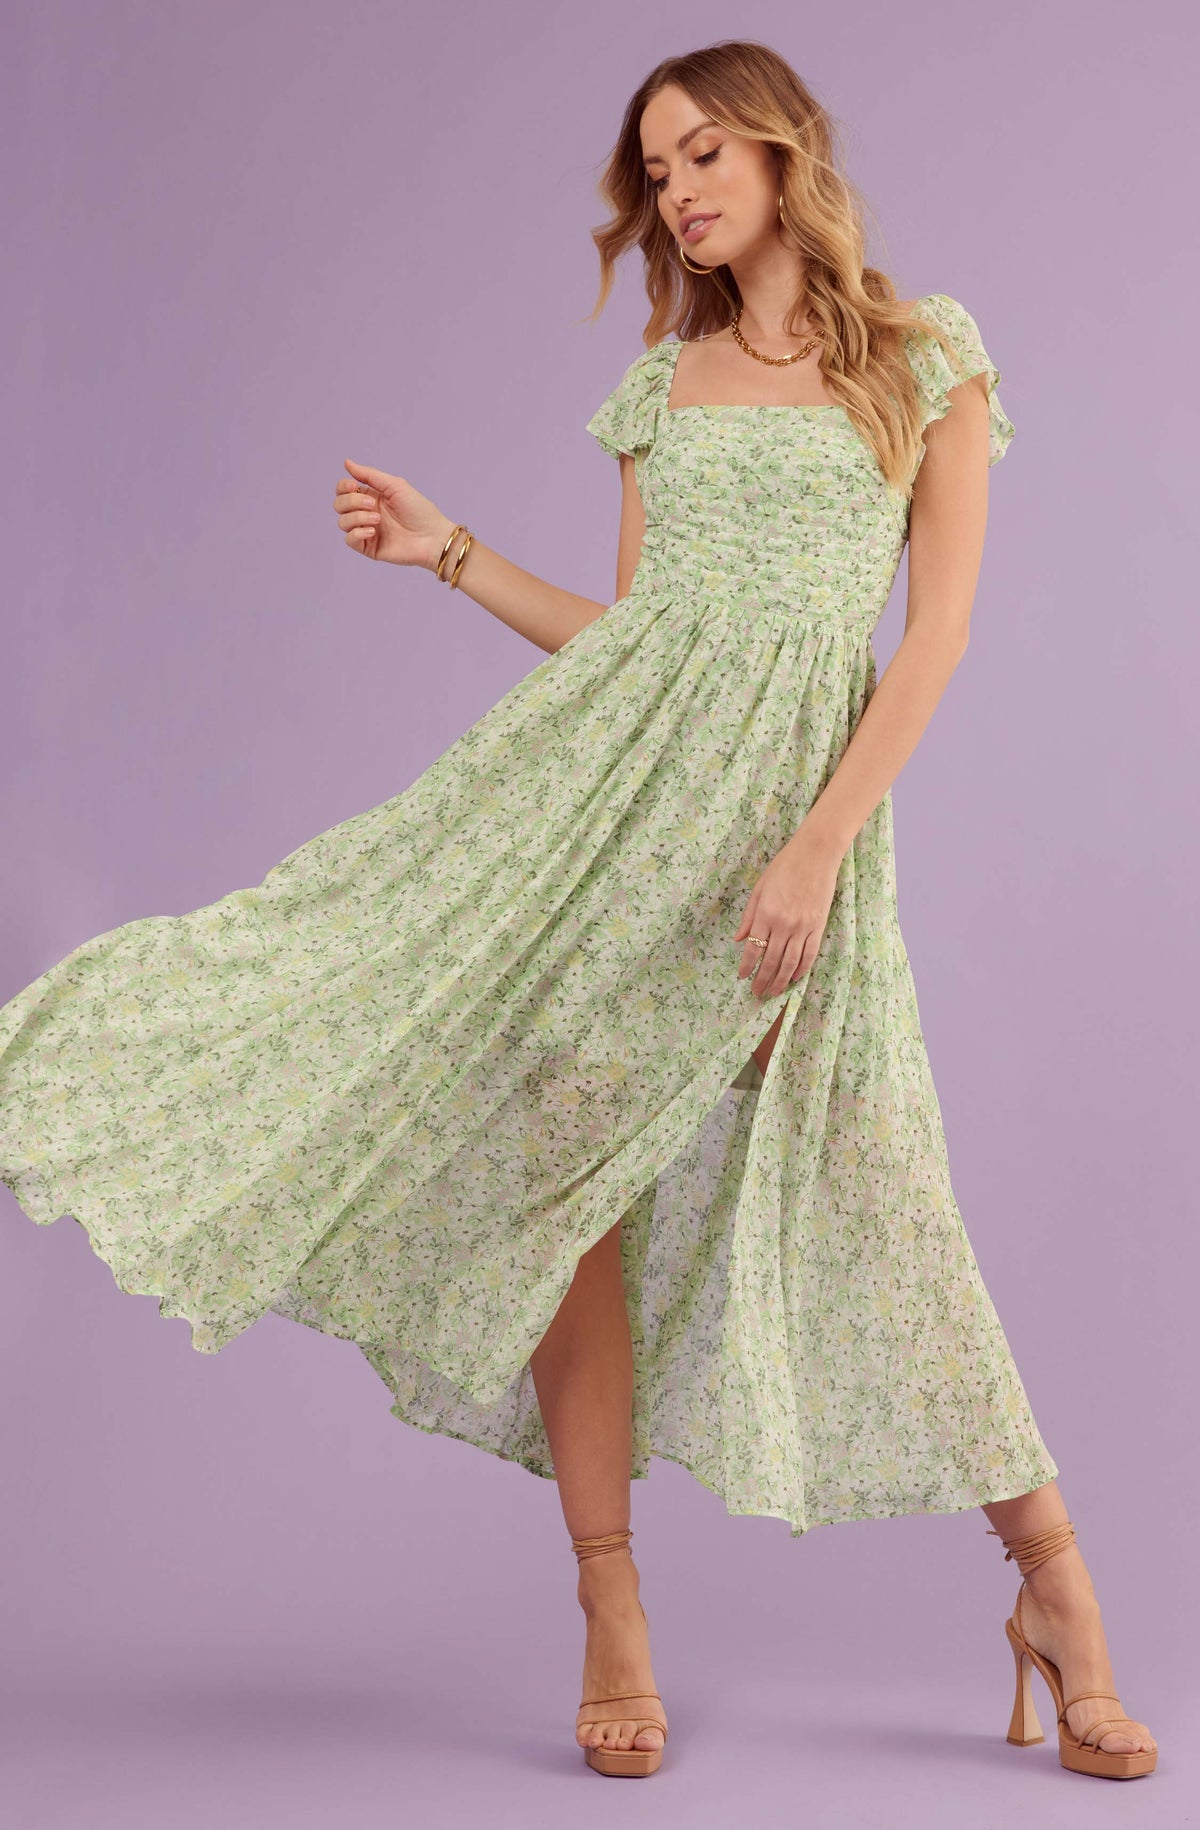 Lilac Floral Cap Sleeve Dress in Longer Length – Udtfashion